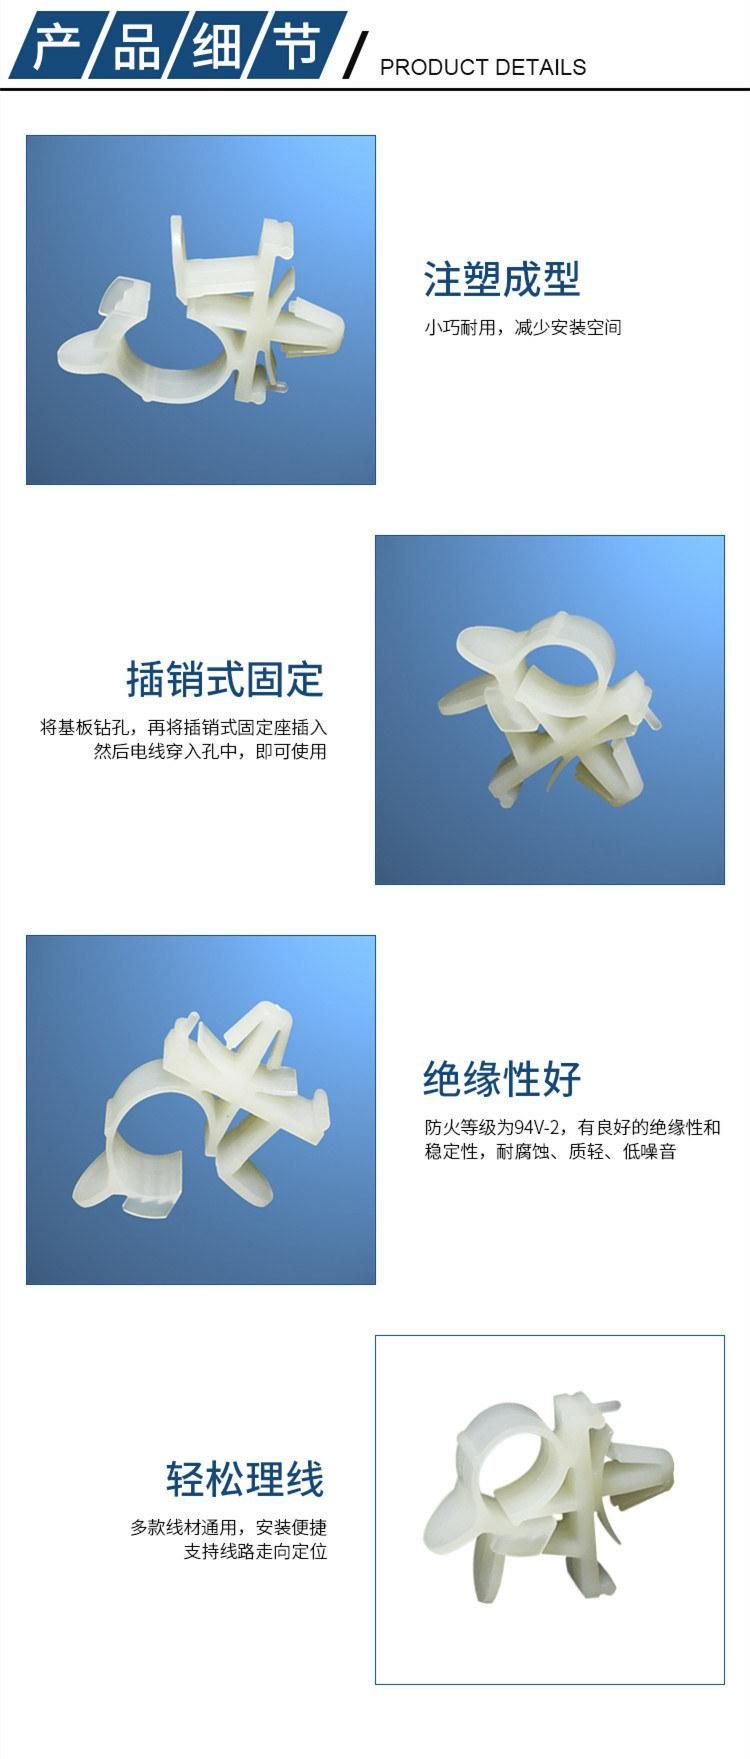 Plastic Cable Fasten Saddle Bolt Type Fixing Buckle, Heyingcn Plastic Injection Clip Buckle Nylon Cable Clip